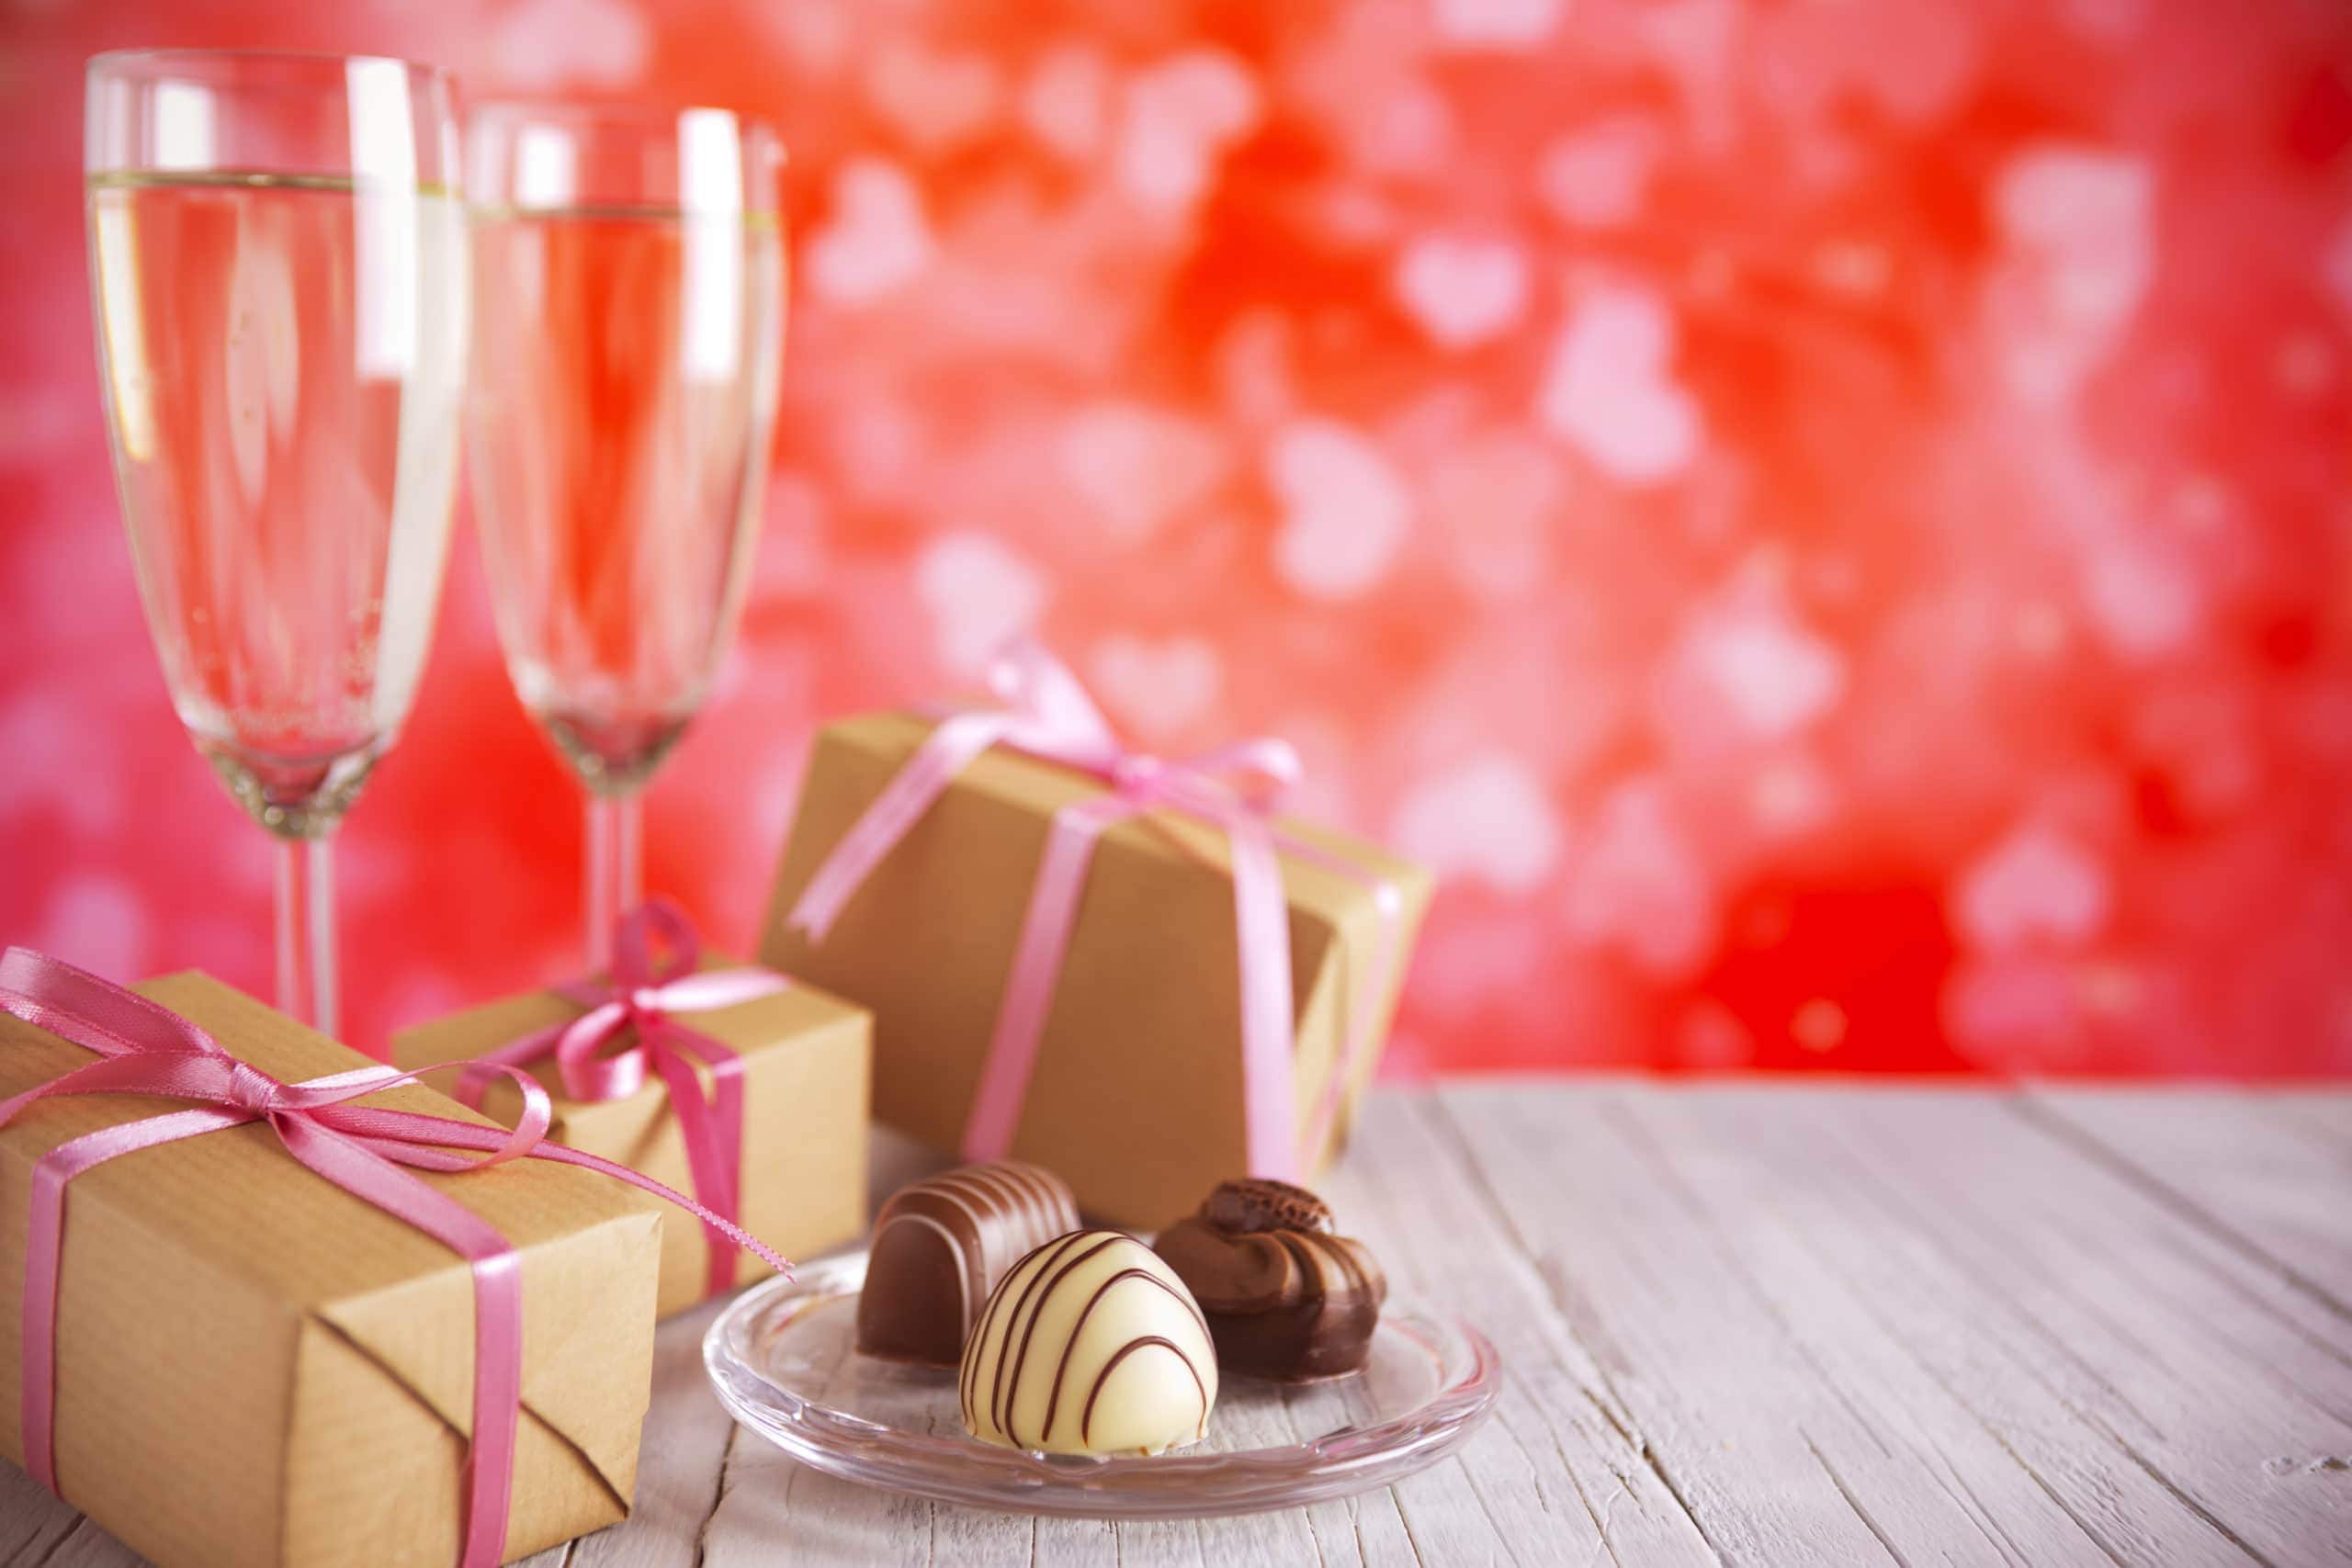 Champagne, chocolates, and small gifts